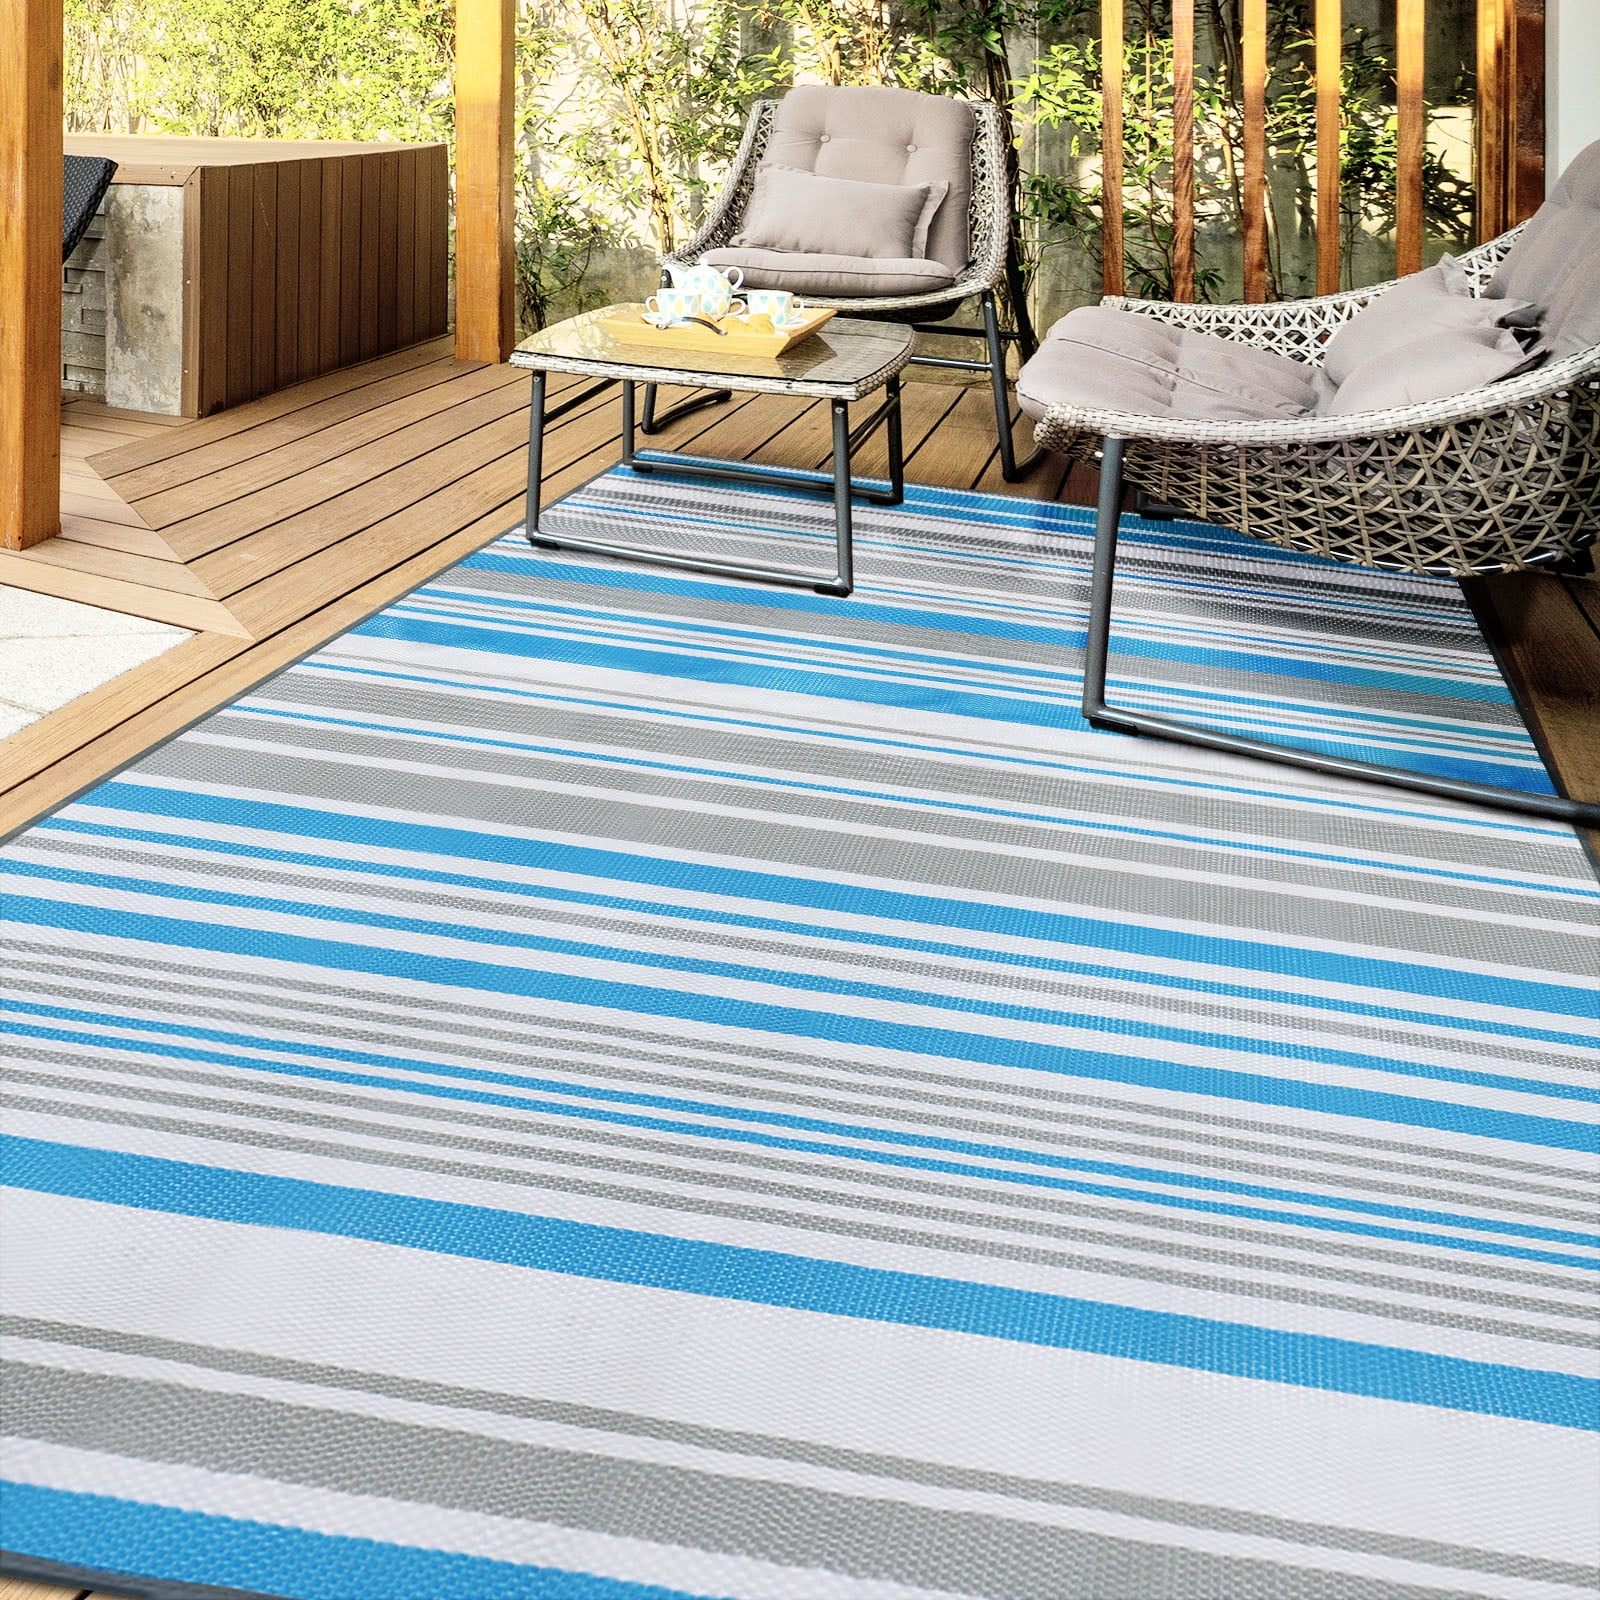 Outsunny RV Mat, Outdoor Patio Rug / Large Camping Carpet with Carrying  Bag, 9' x 12', Waterproof Plastic Straw, Reversible Design for Backyard,  Porch, Picnic, Poolside, Blue & White Striped